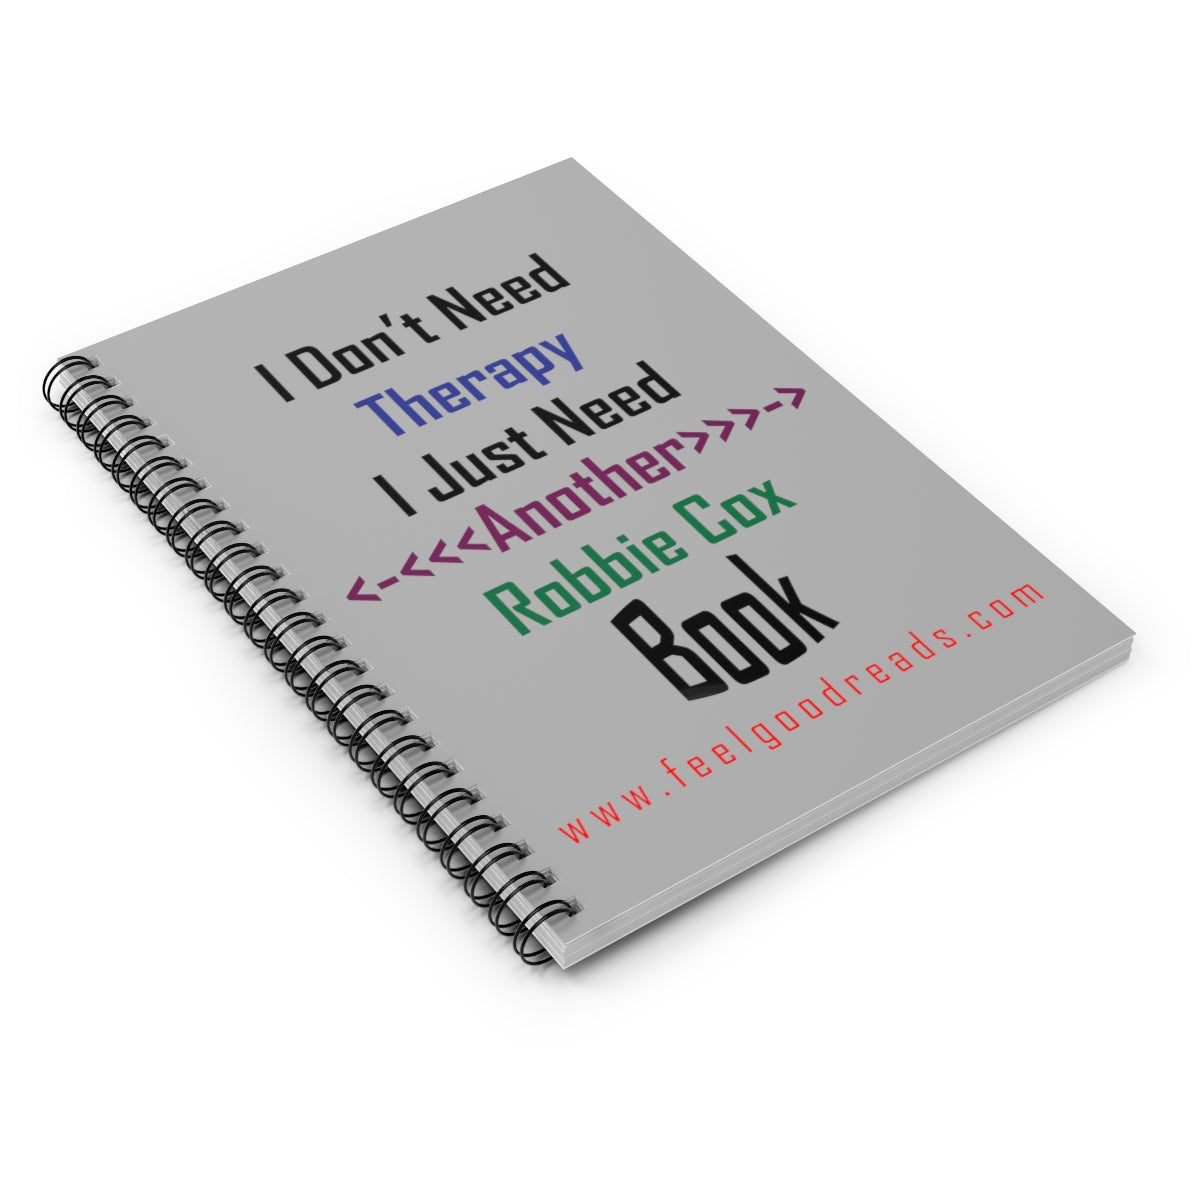 Therapy Spiral Notebook - Ruled Line